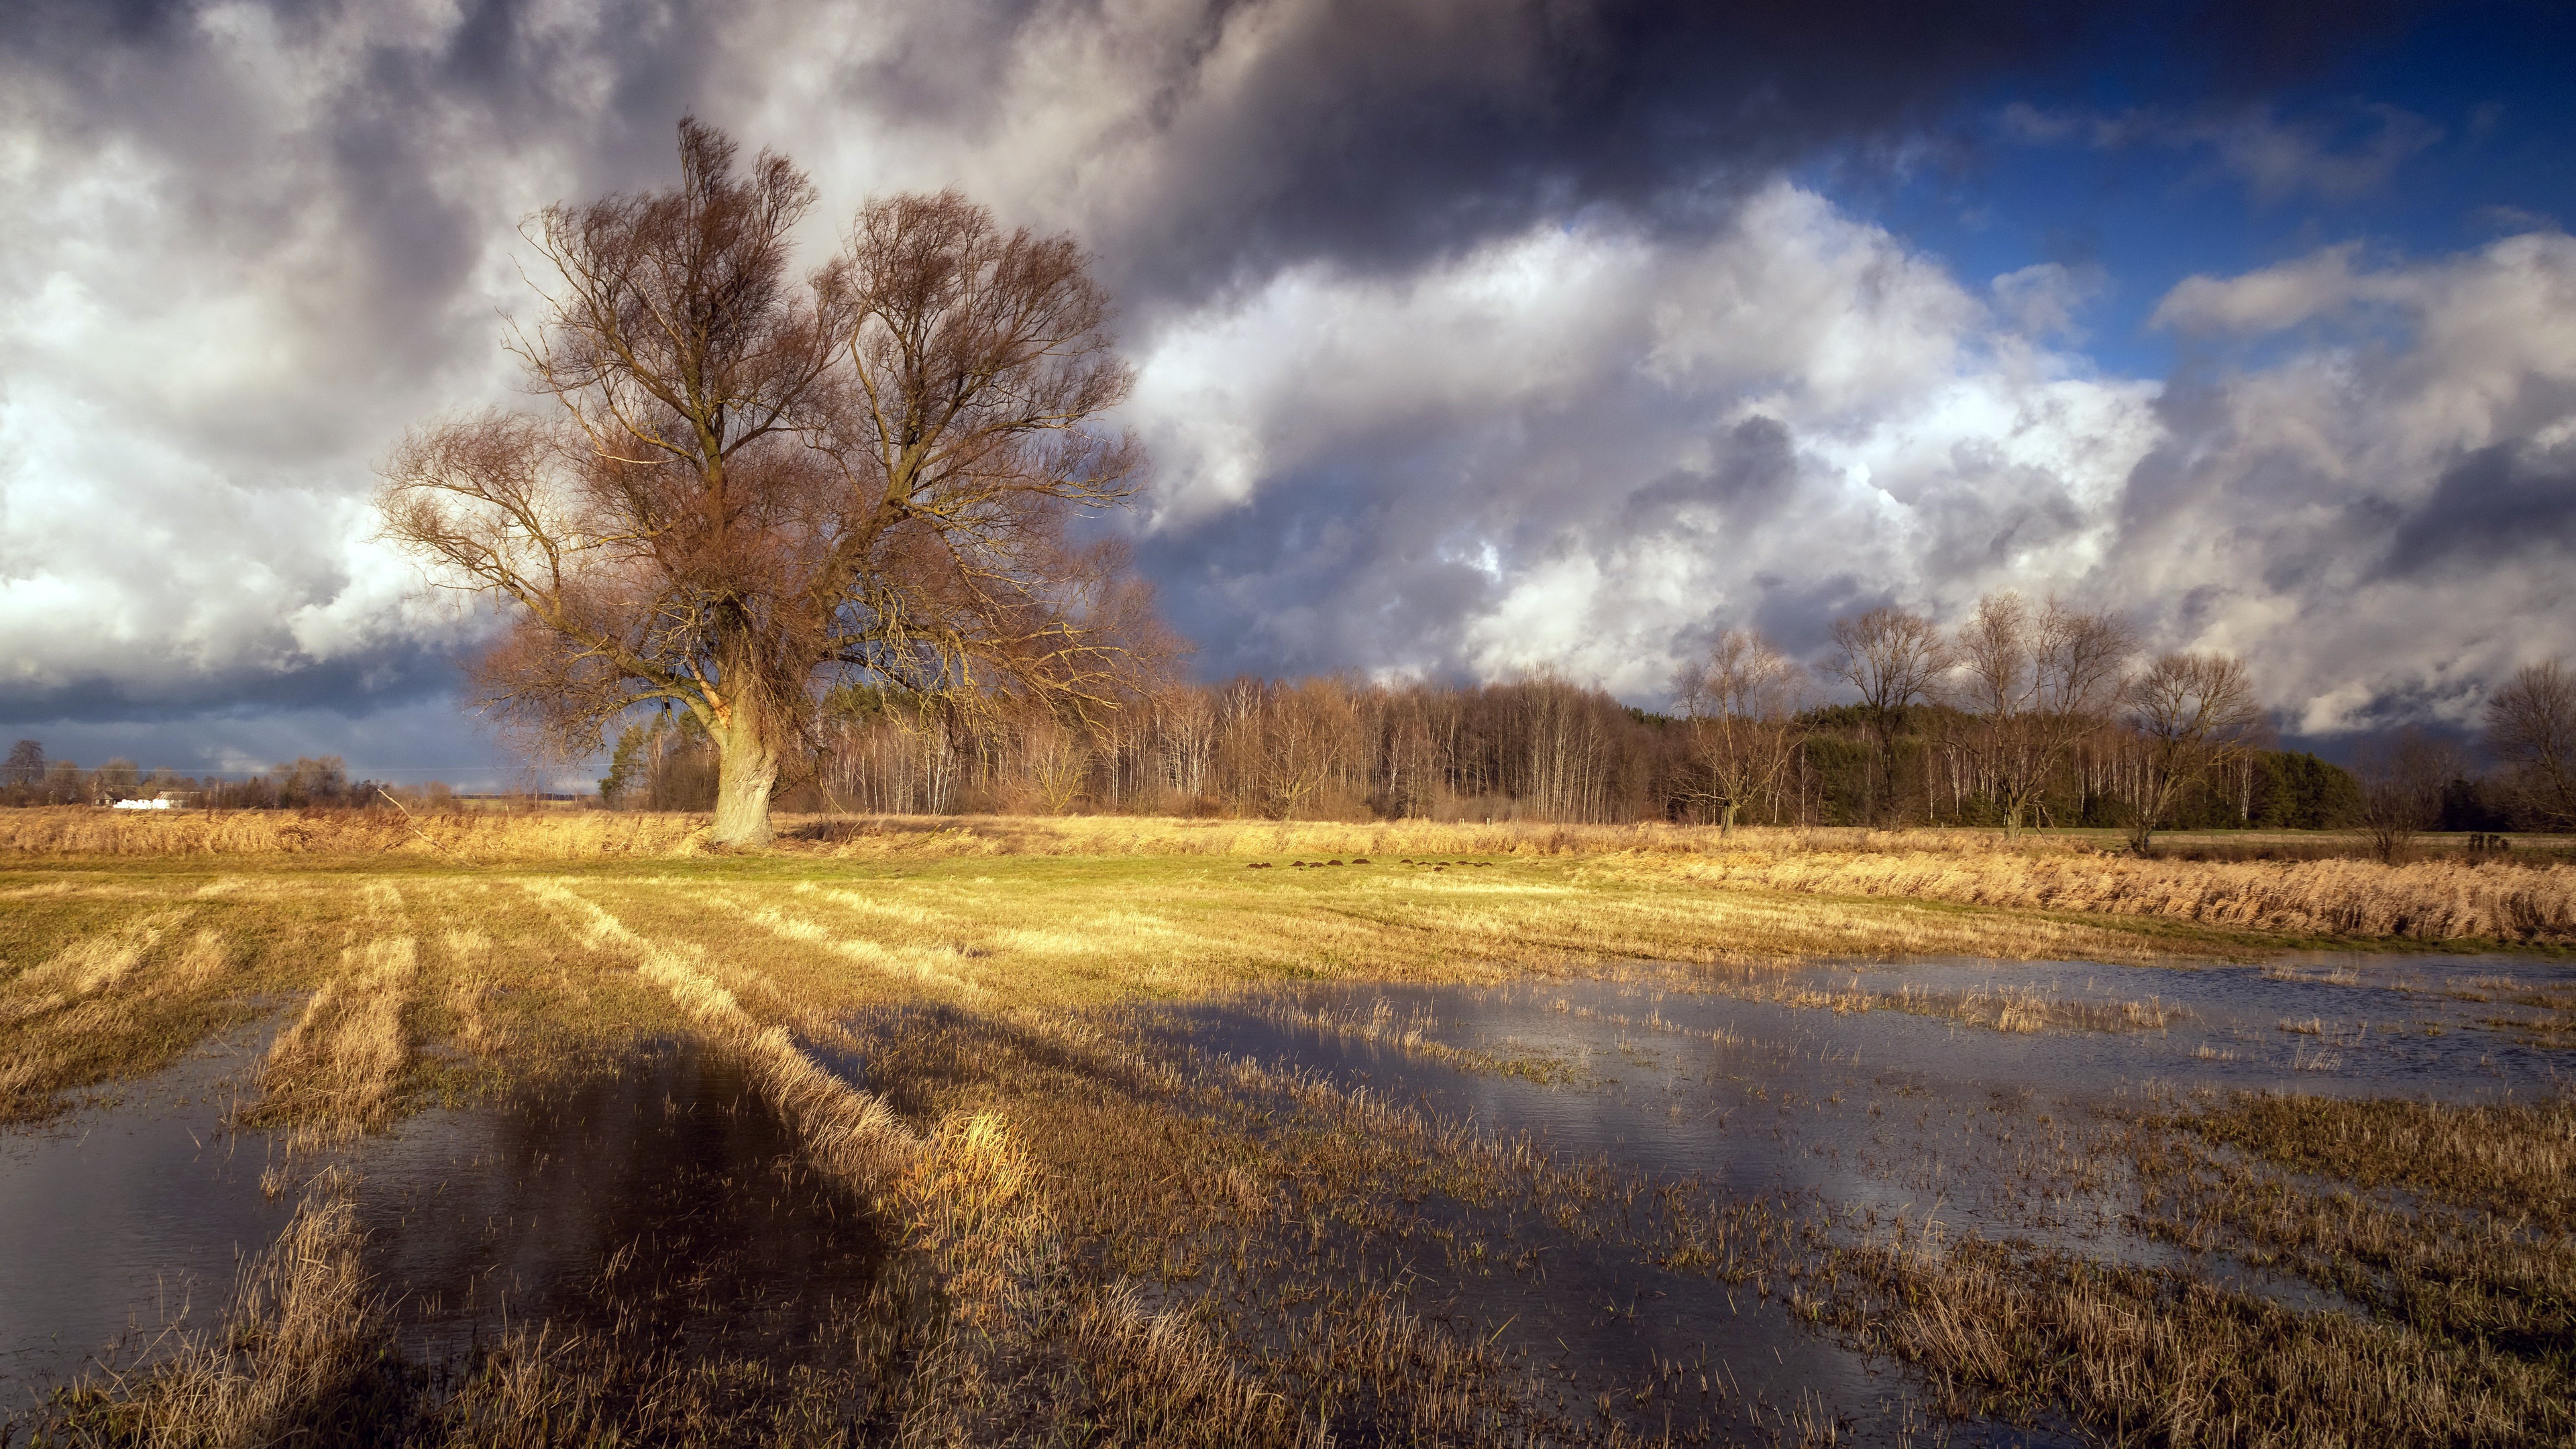 General 3840x2160 outdoors landscape field fall clouds water trees nature